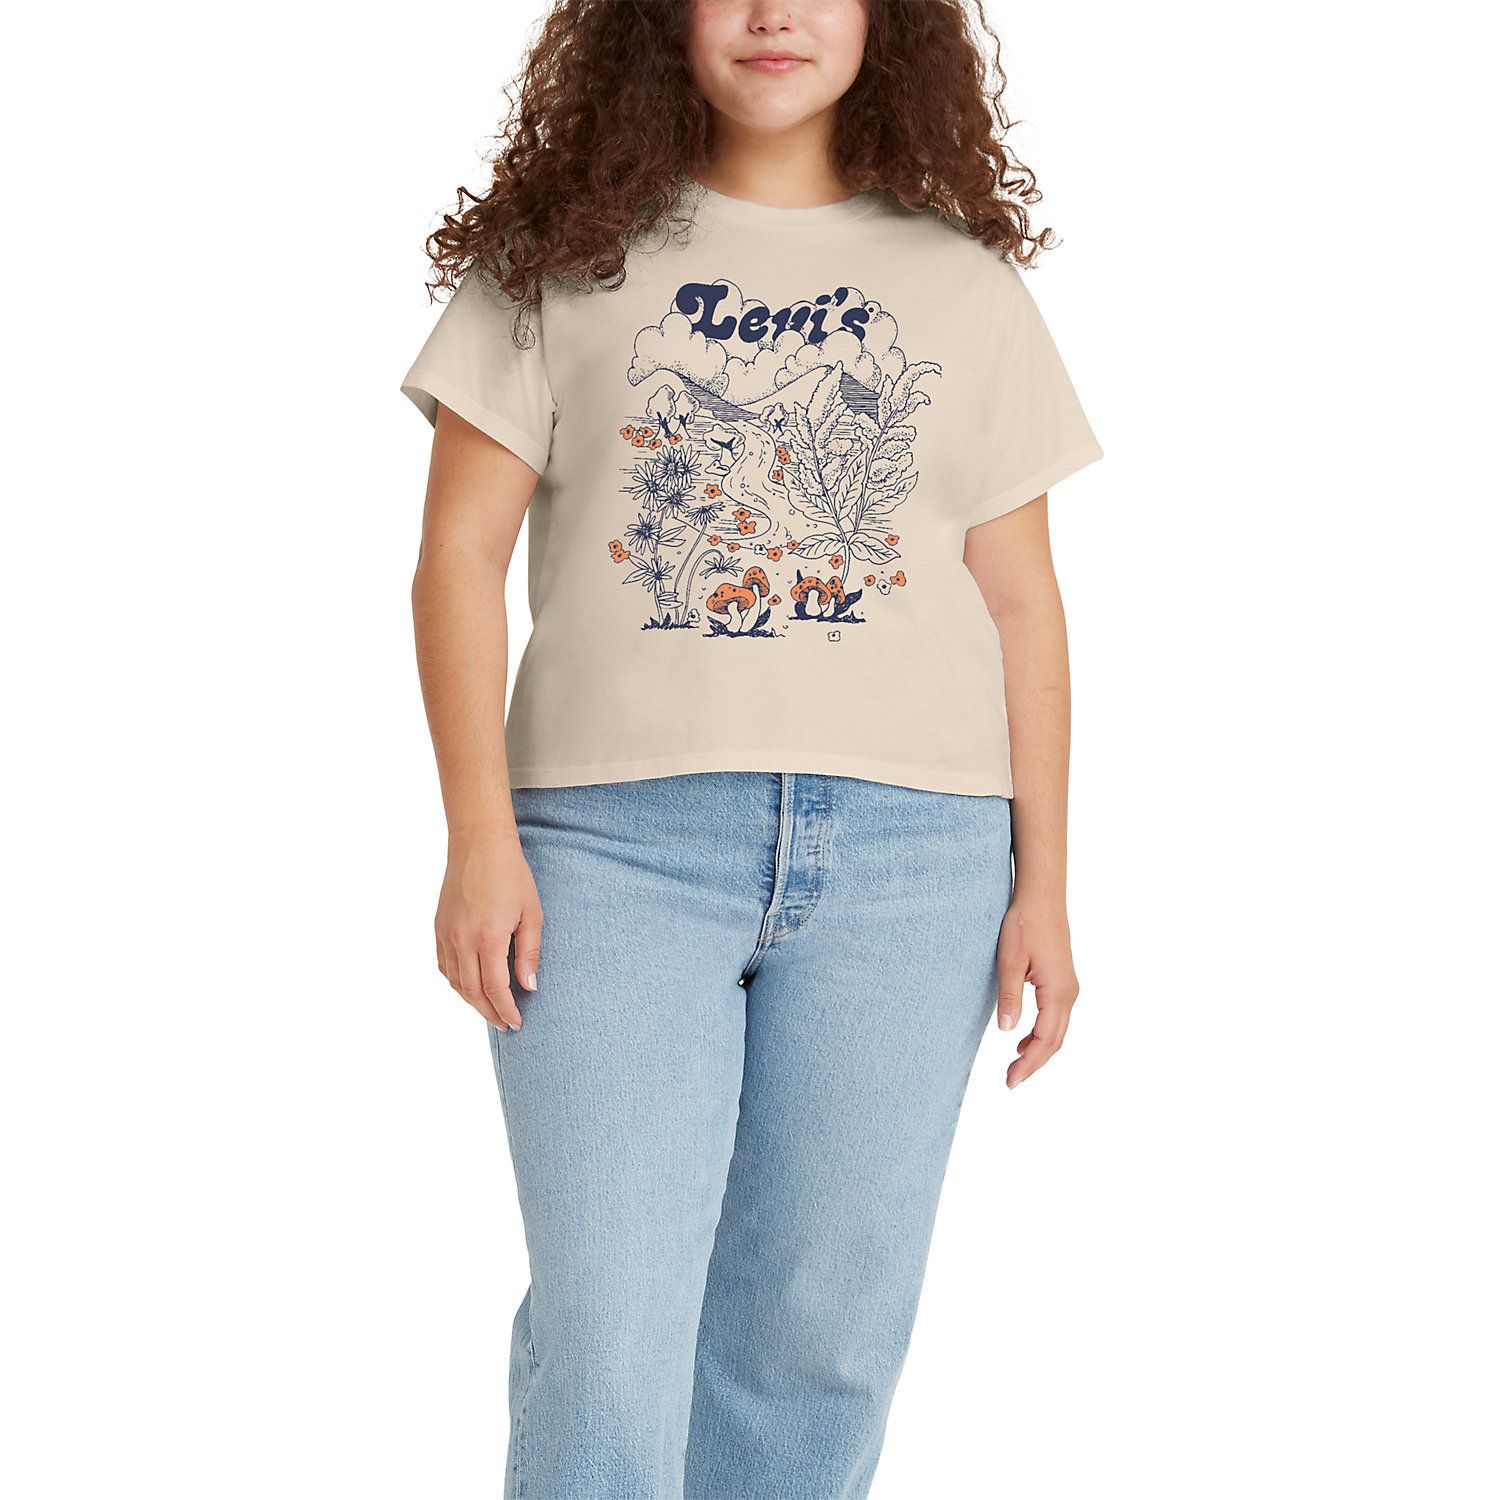 Image for Levi's Graphic Varsity Tee at Kohl's.